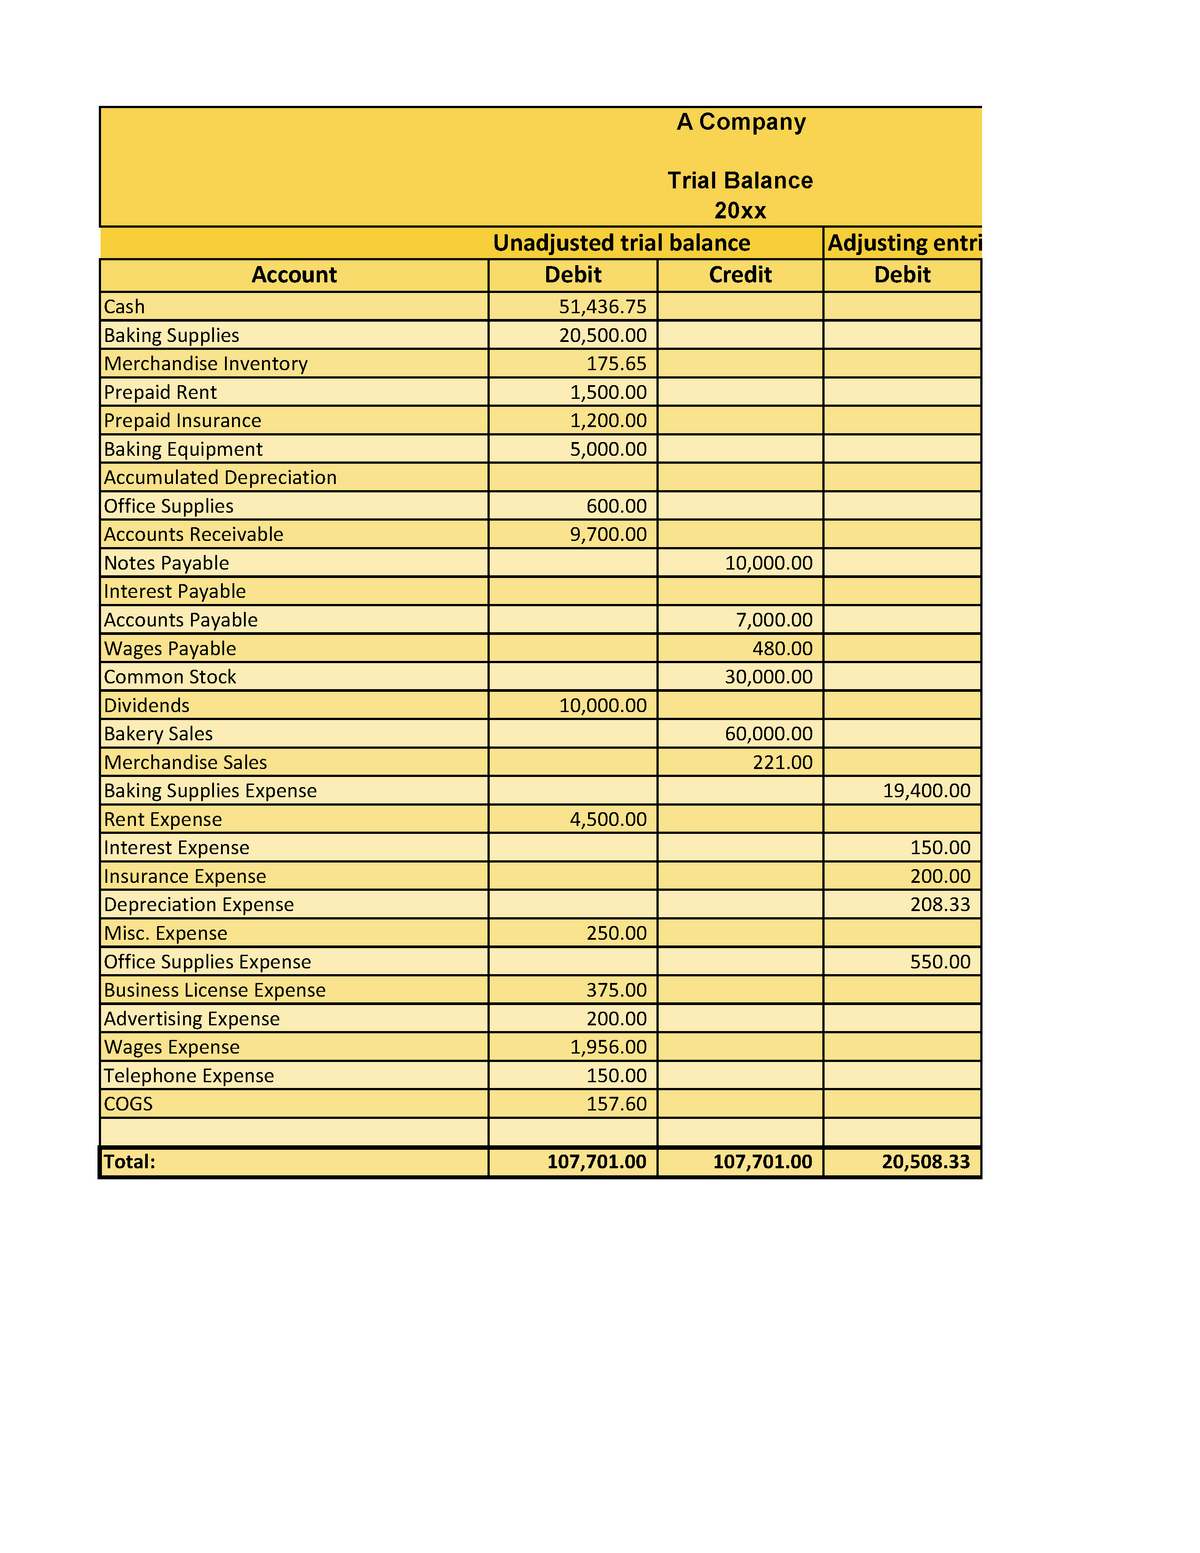 acc-201-7-2-final-project-company-accounting-workbook-trial-balance